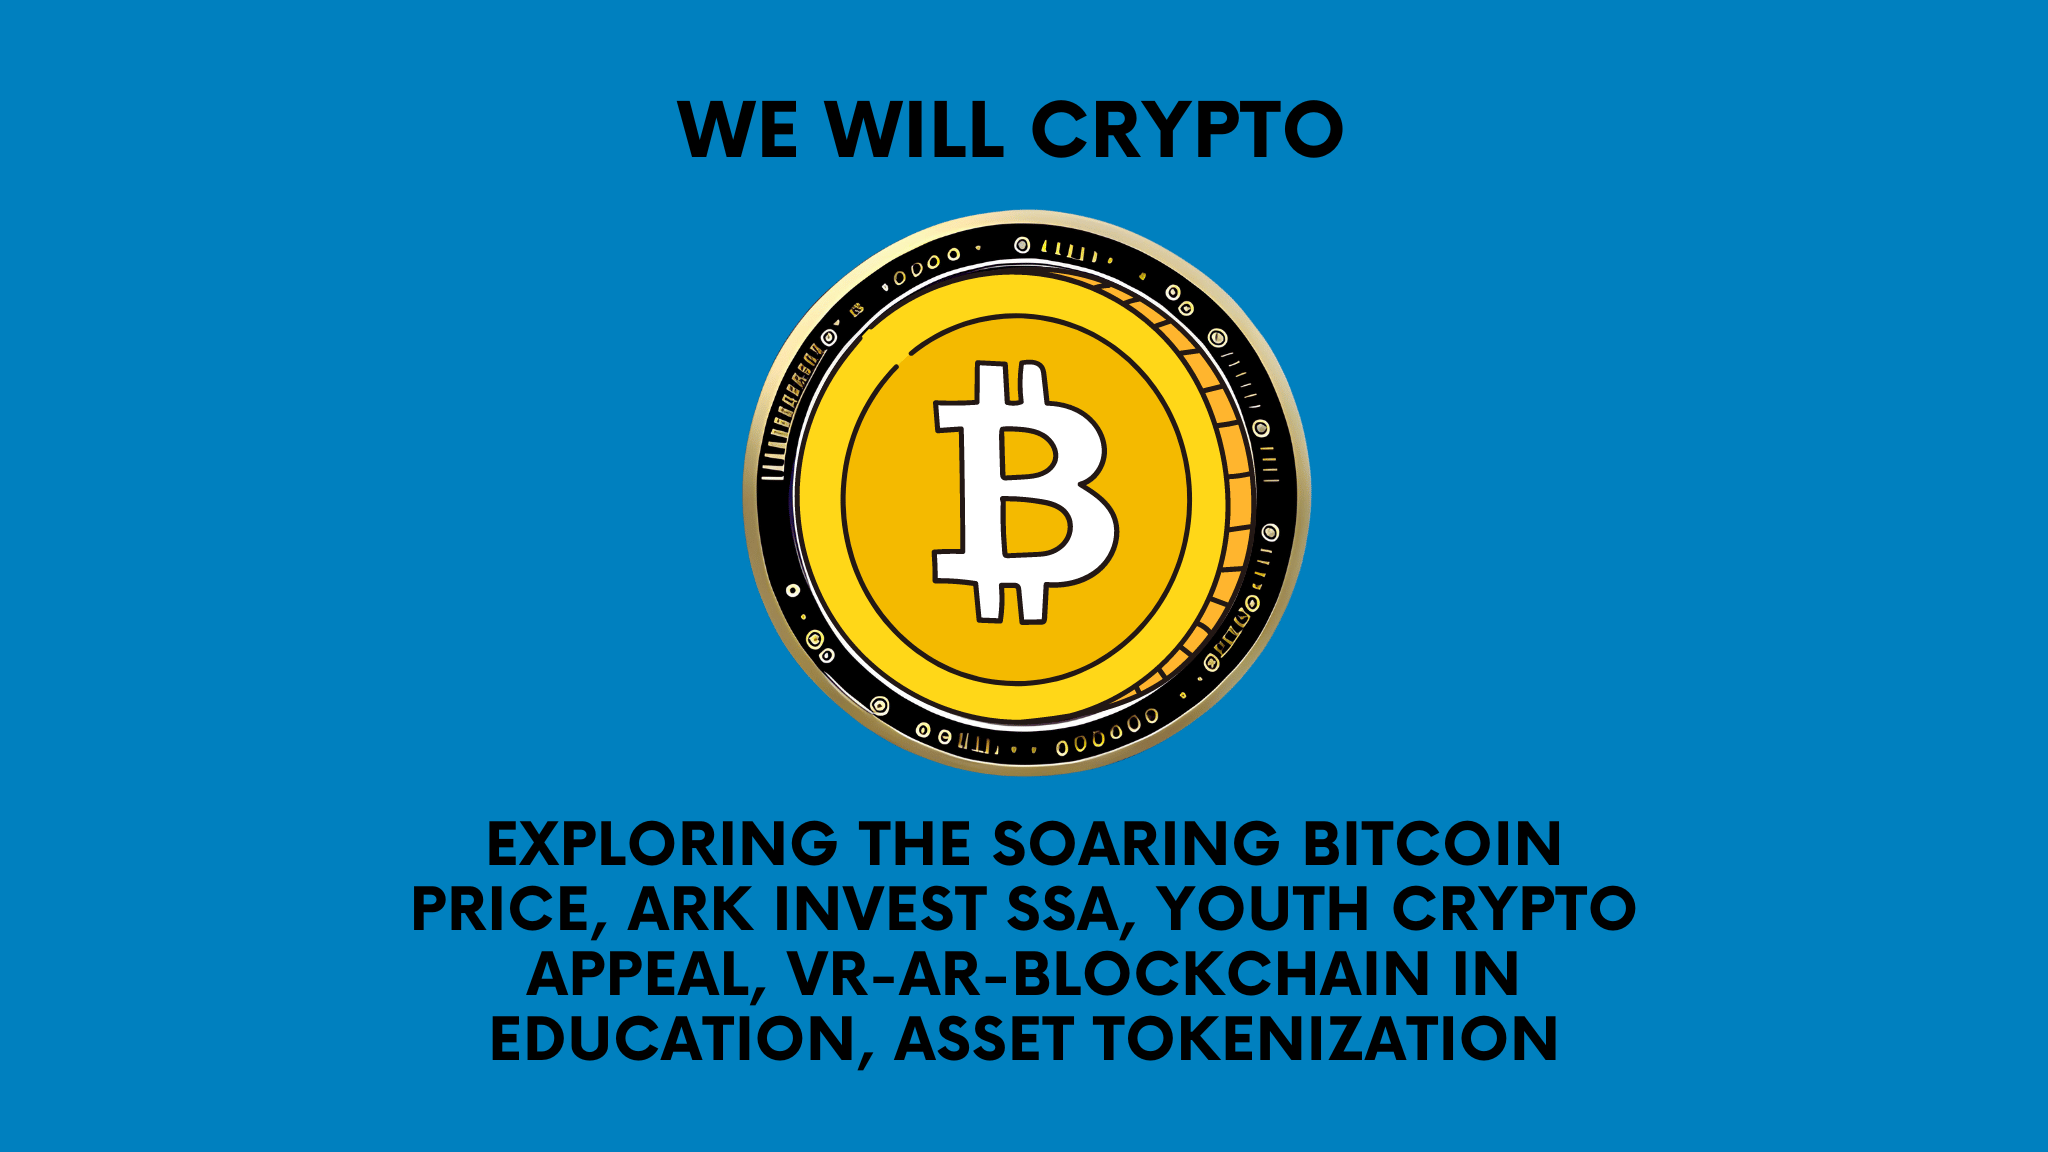 Exploring the Soaring Bitcoin Price, ARK Invest SSA, Youth Crypto Appeal, VR-AR-Blockchain in Education, Asset Tokenization